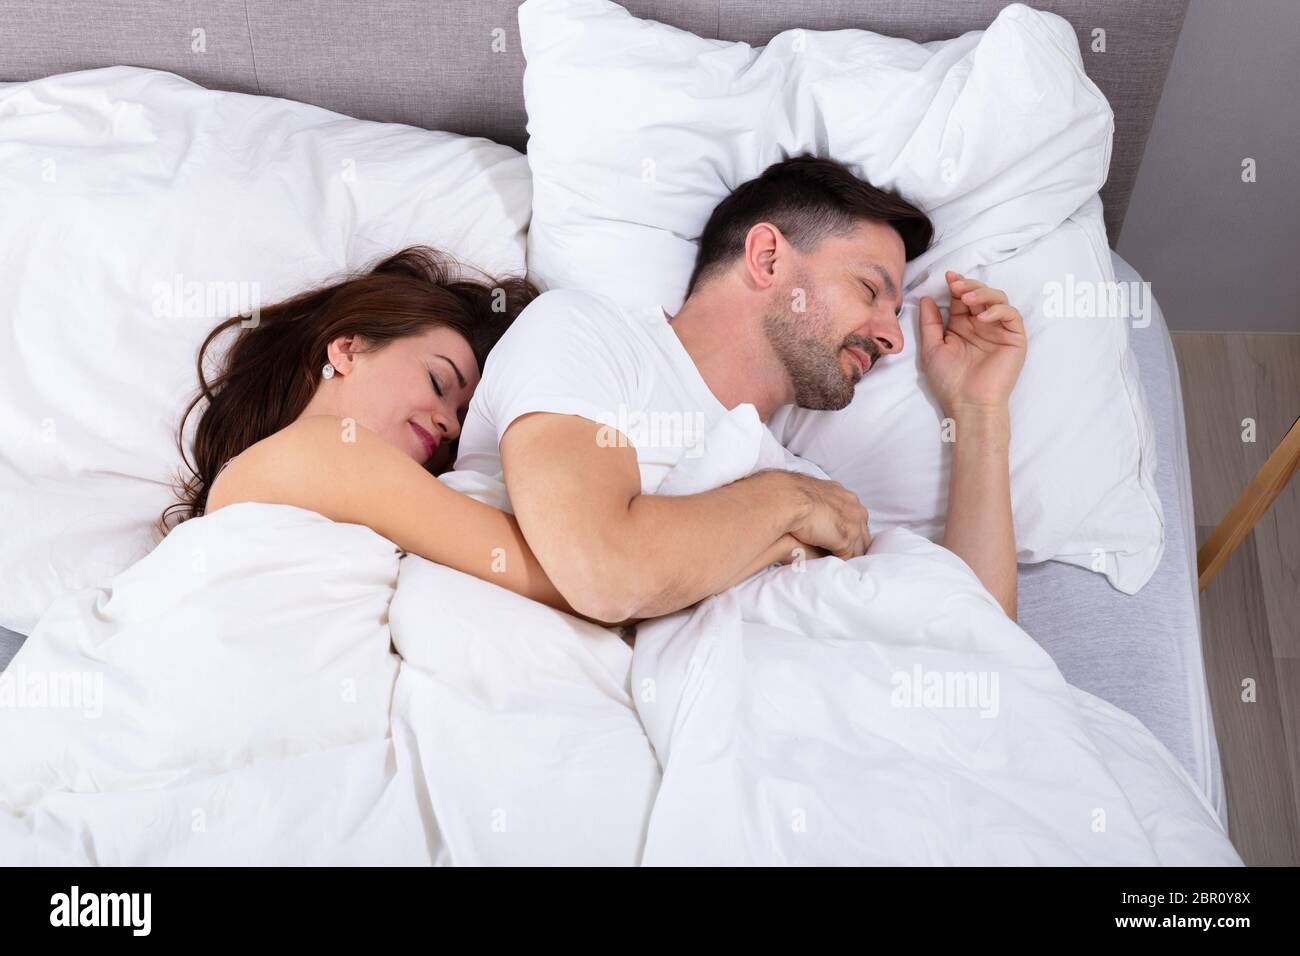 Young Loving Couple Sleeping On Bed With White Blanket Stock Photo